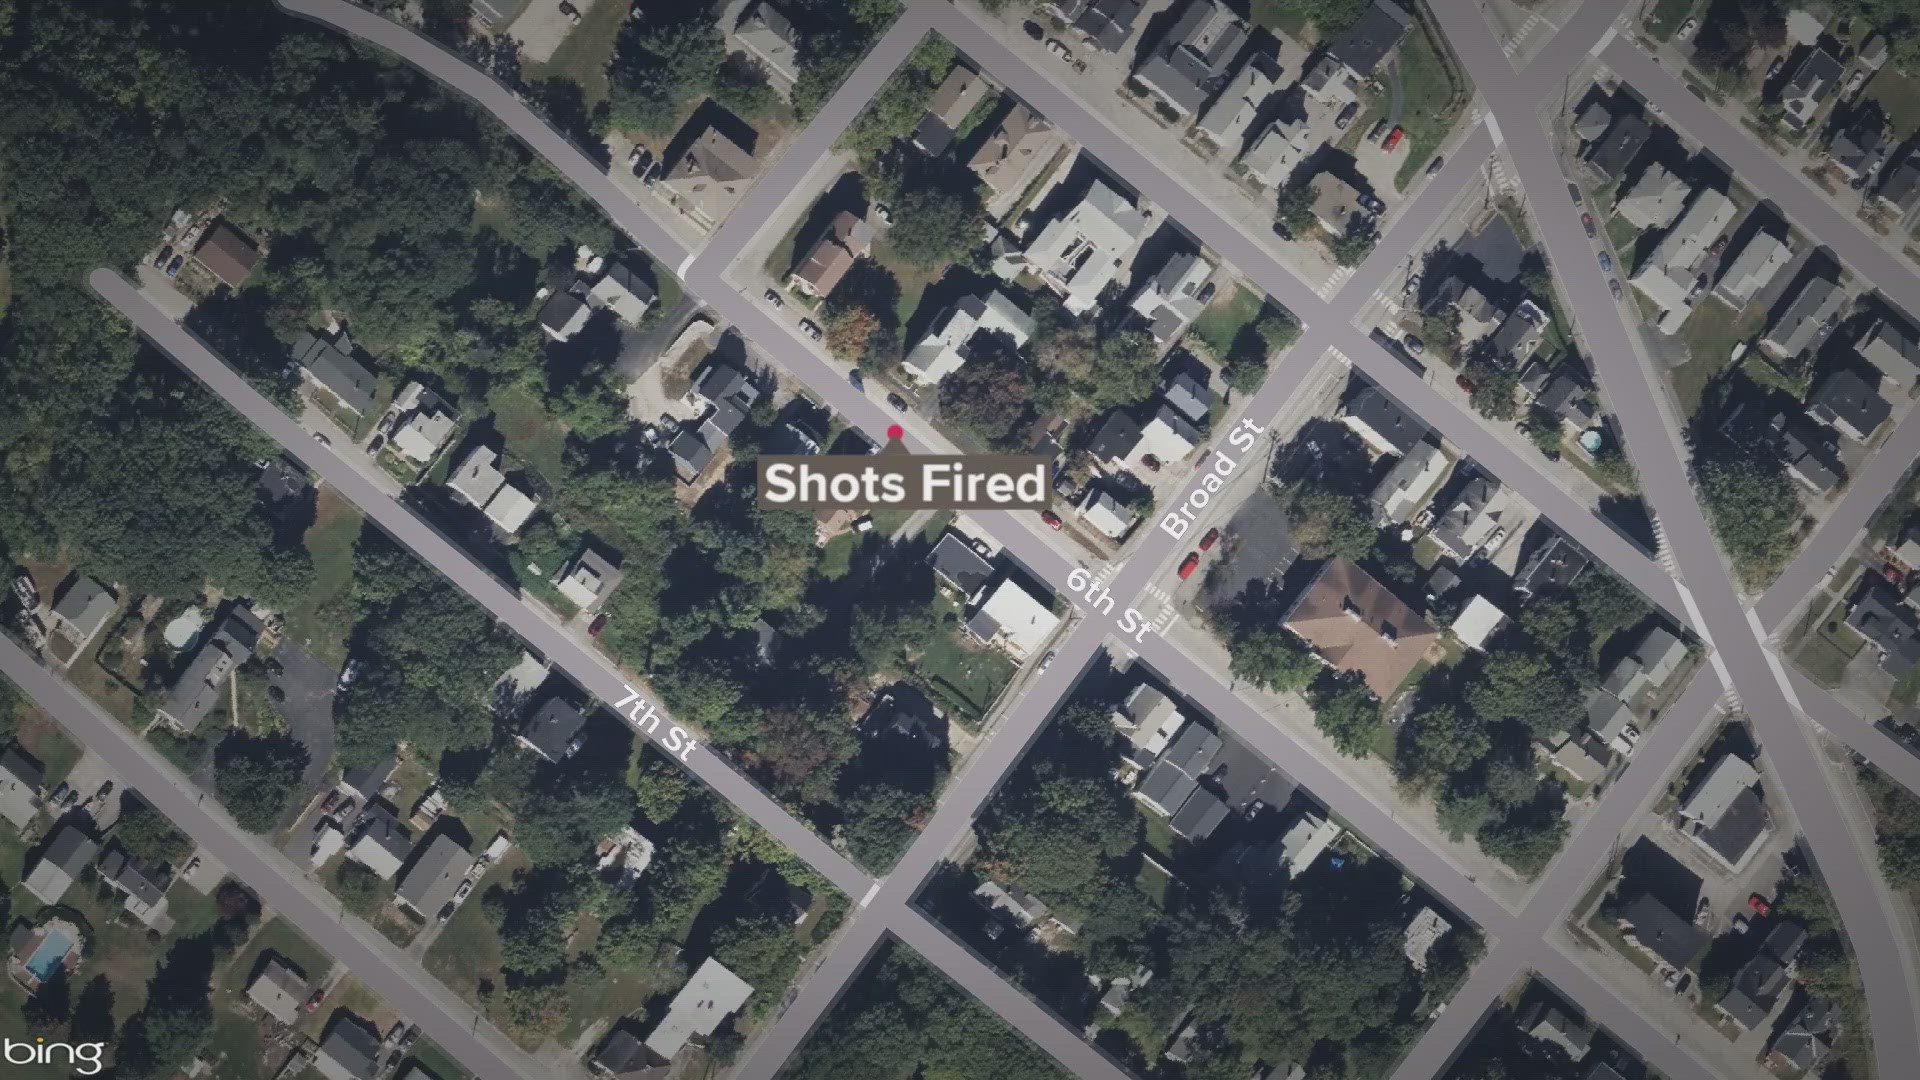 Shortly after 7 p.m. Monday, Auburn police responded to the area of Sixth Street between Broad and Pulsifer Streets for a report of gunshots.